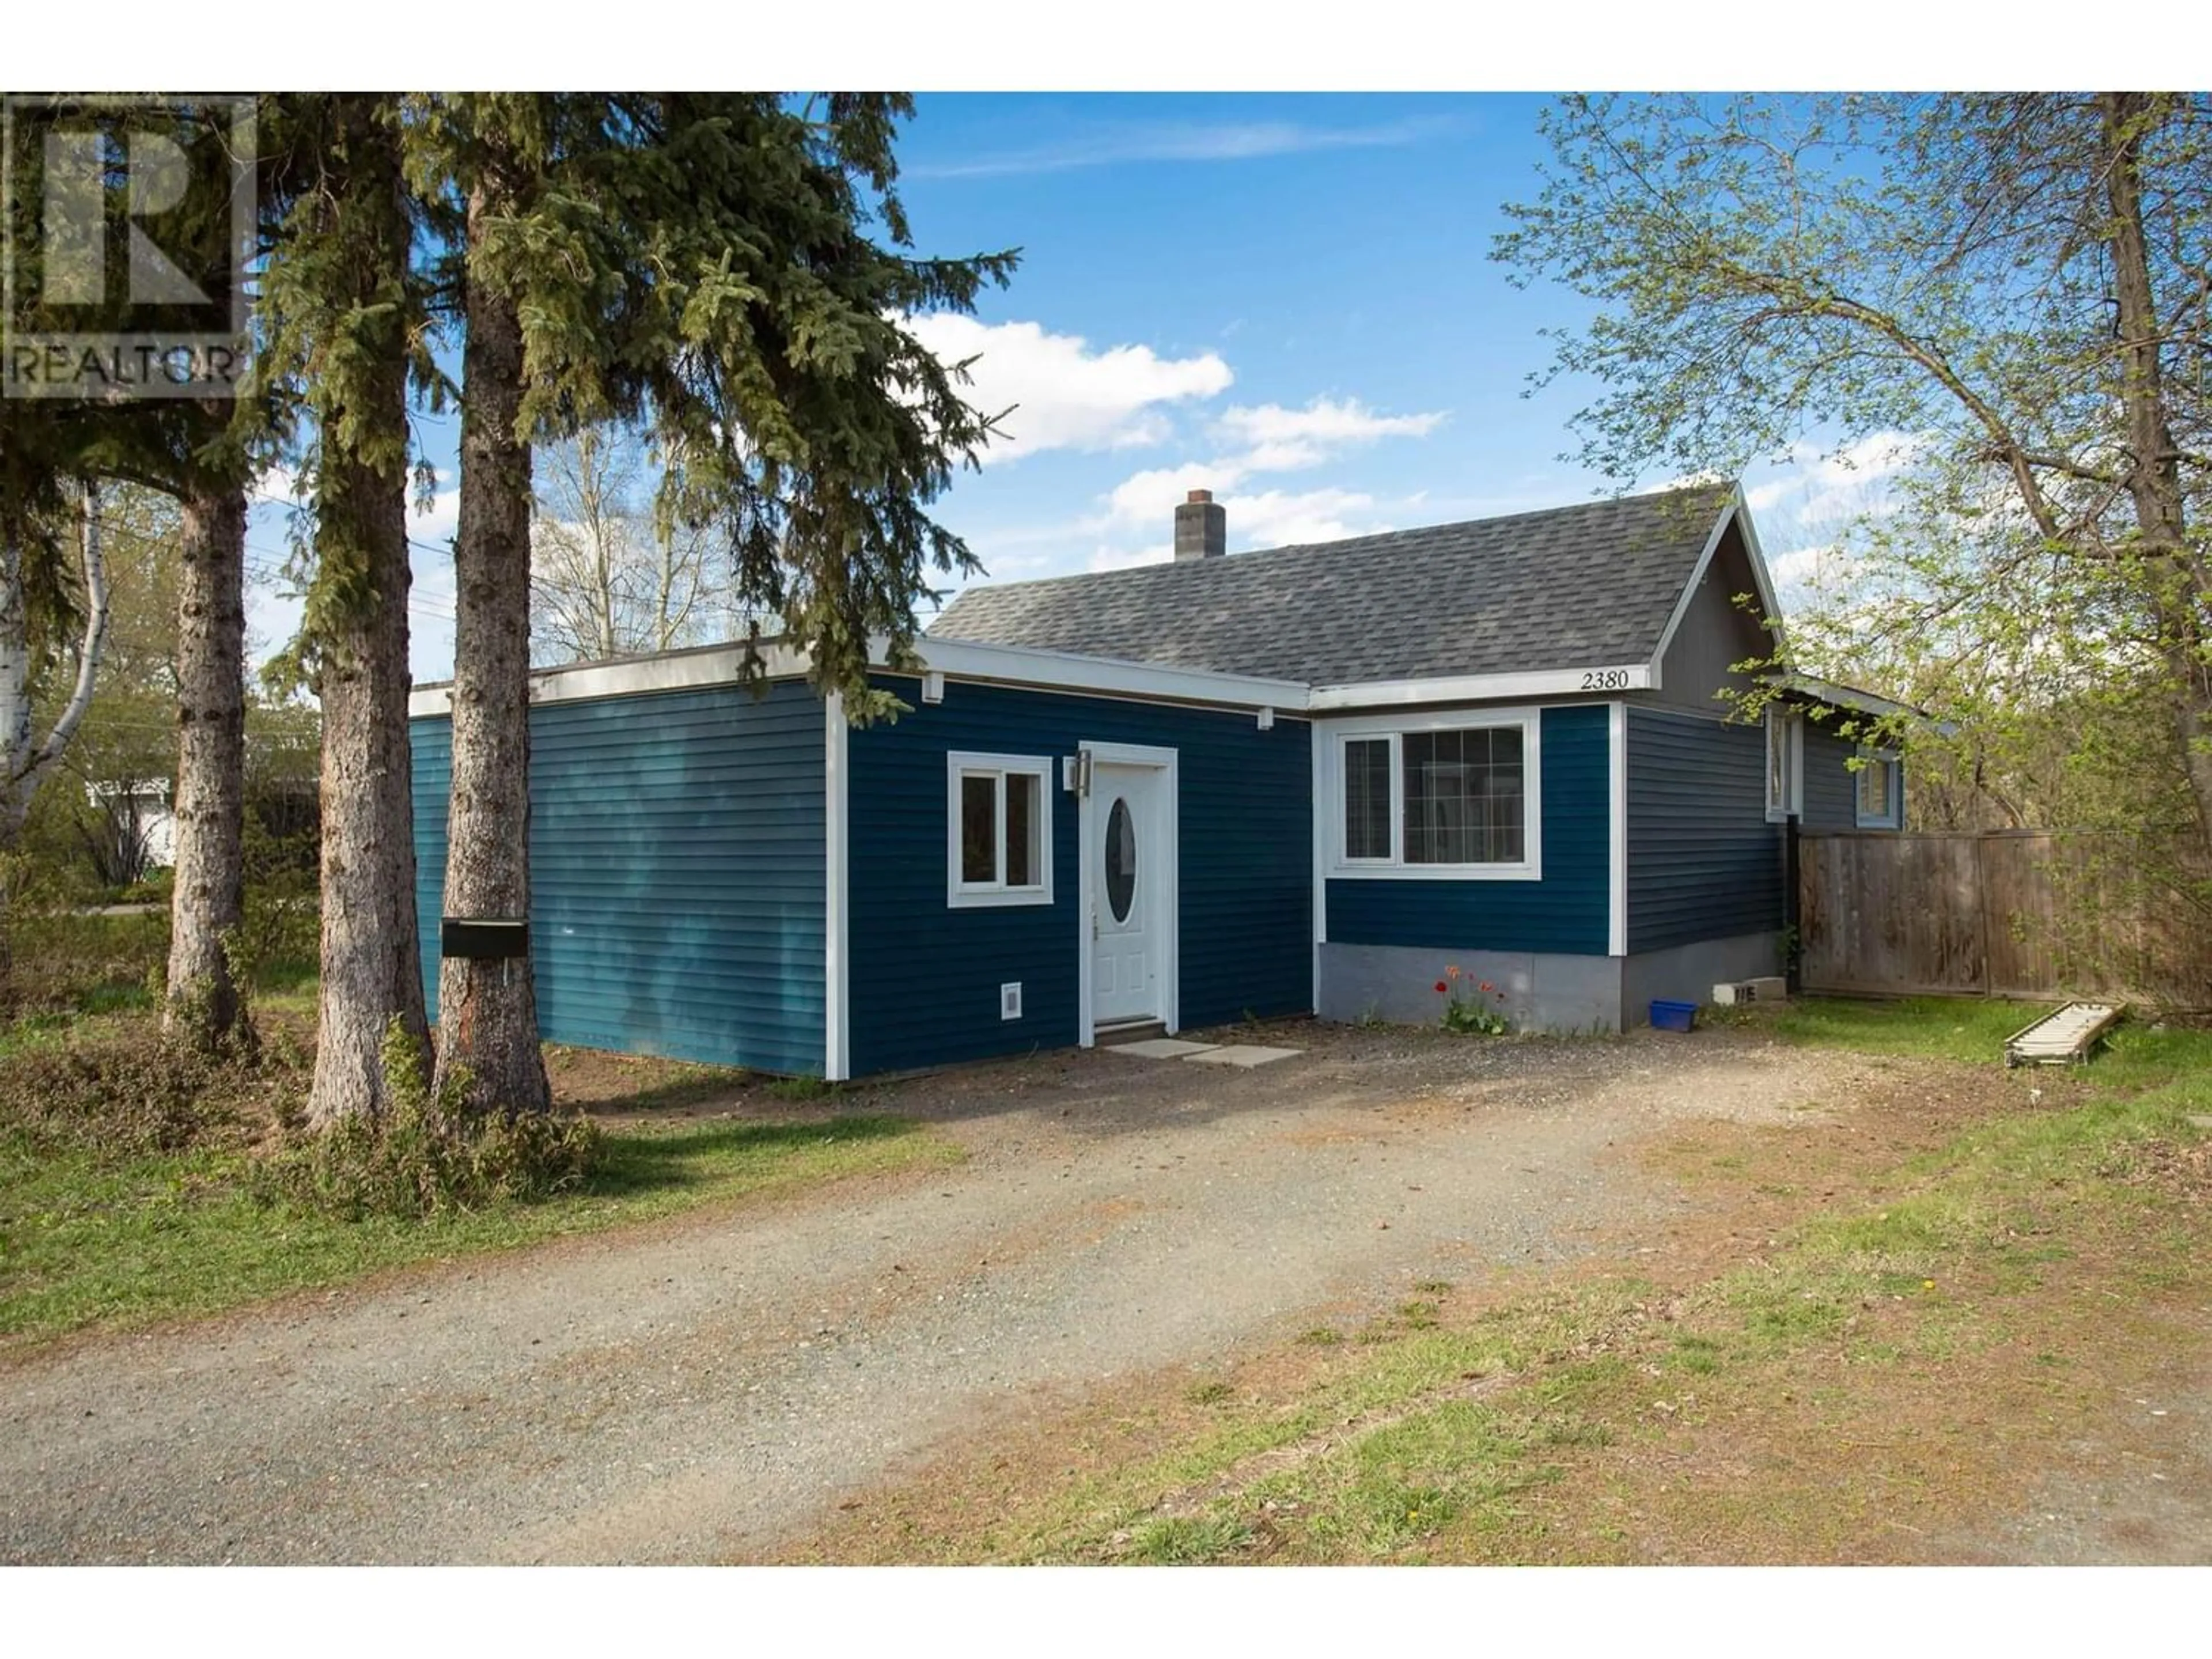 Frontside or backside of a home for 2380 QUADRANT CRESCENT, Prince George British Columbia V2L4W6